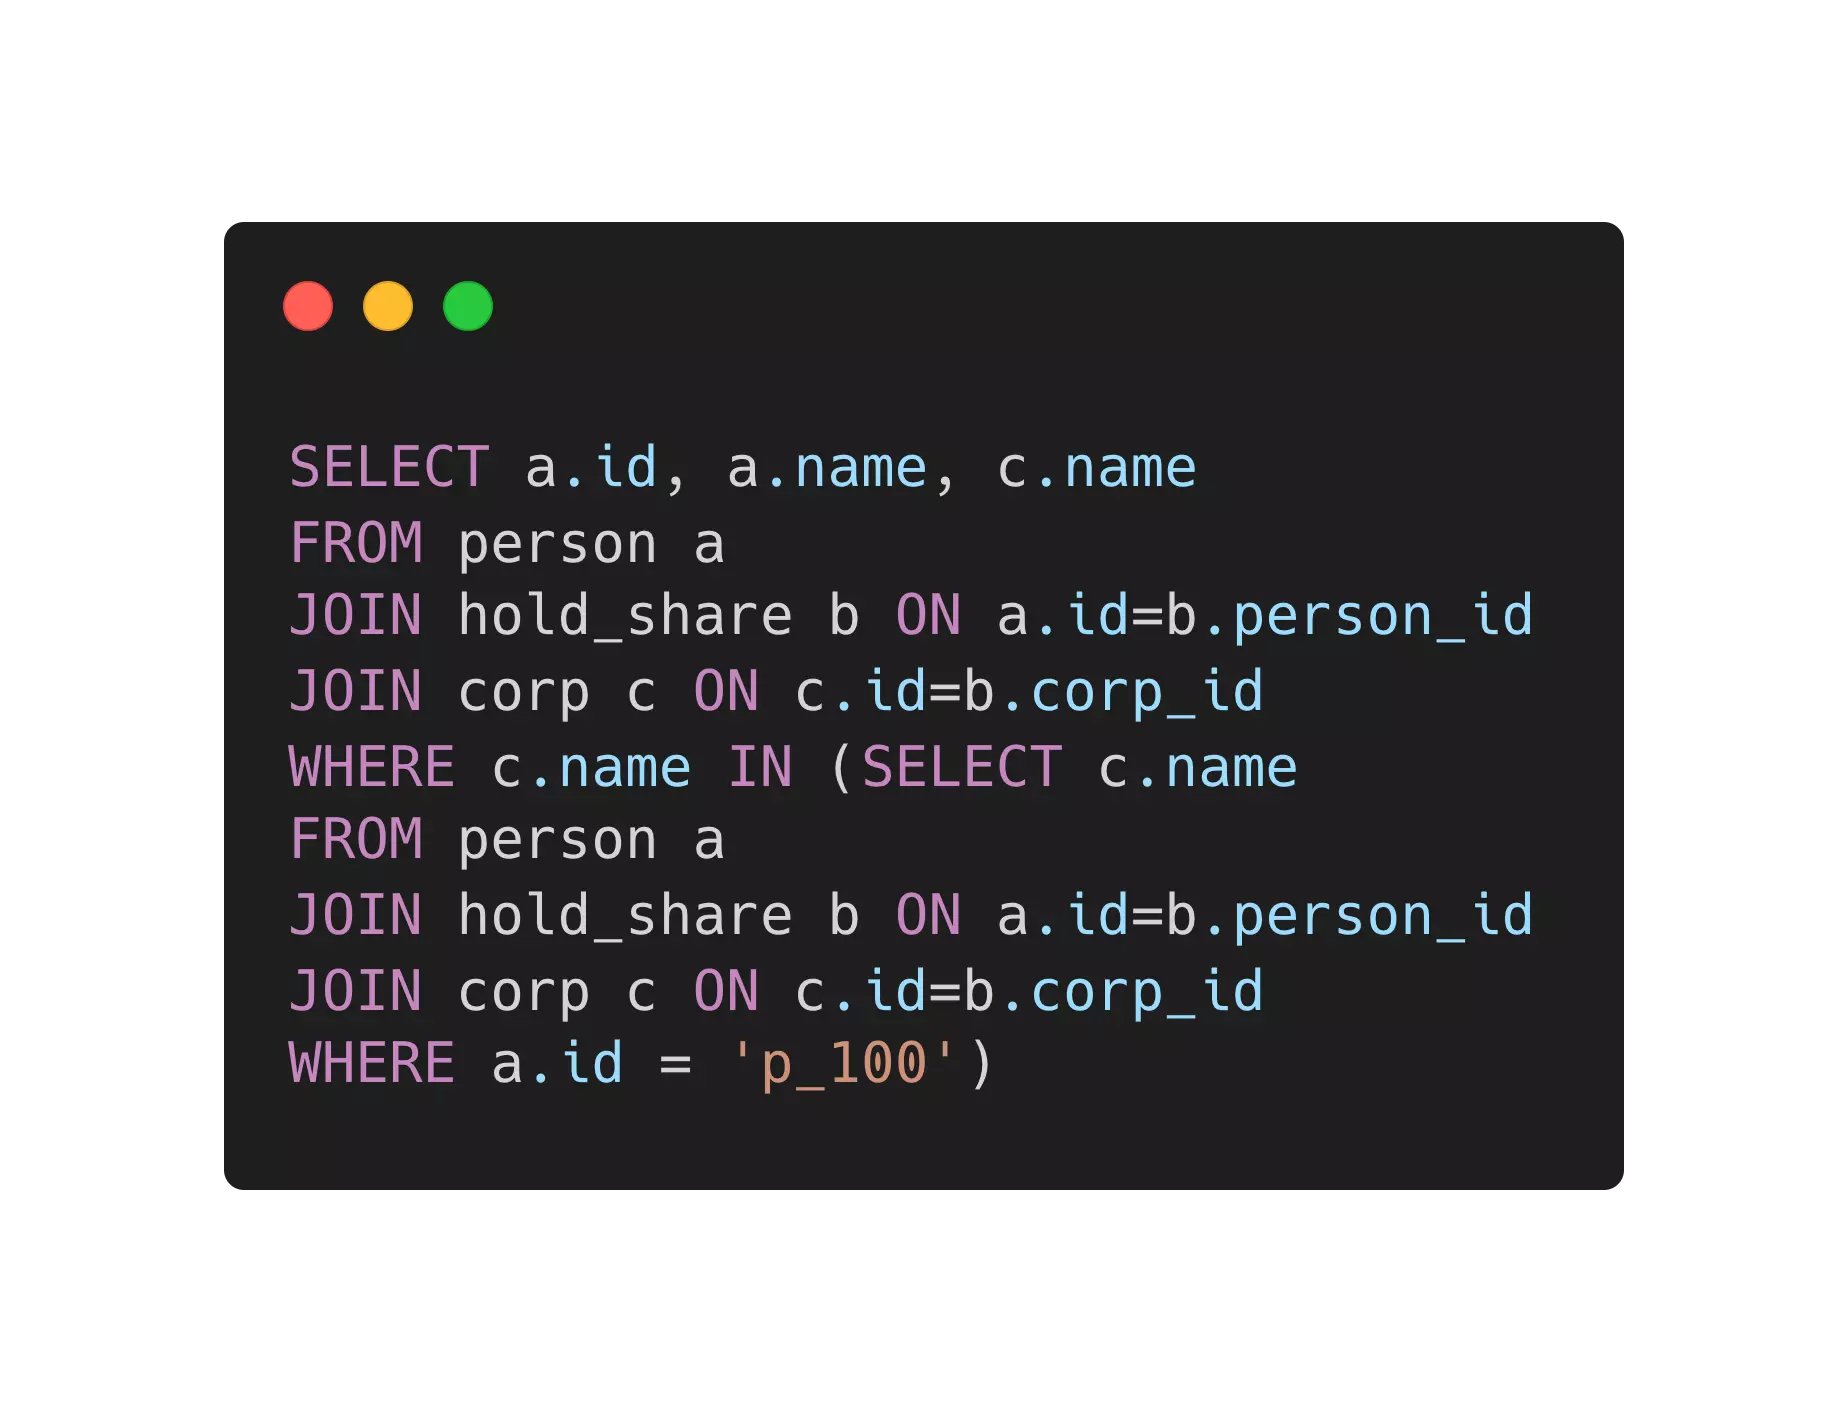 /corp-rel-graph/why_1_sql_join.webp